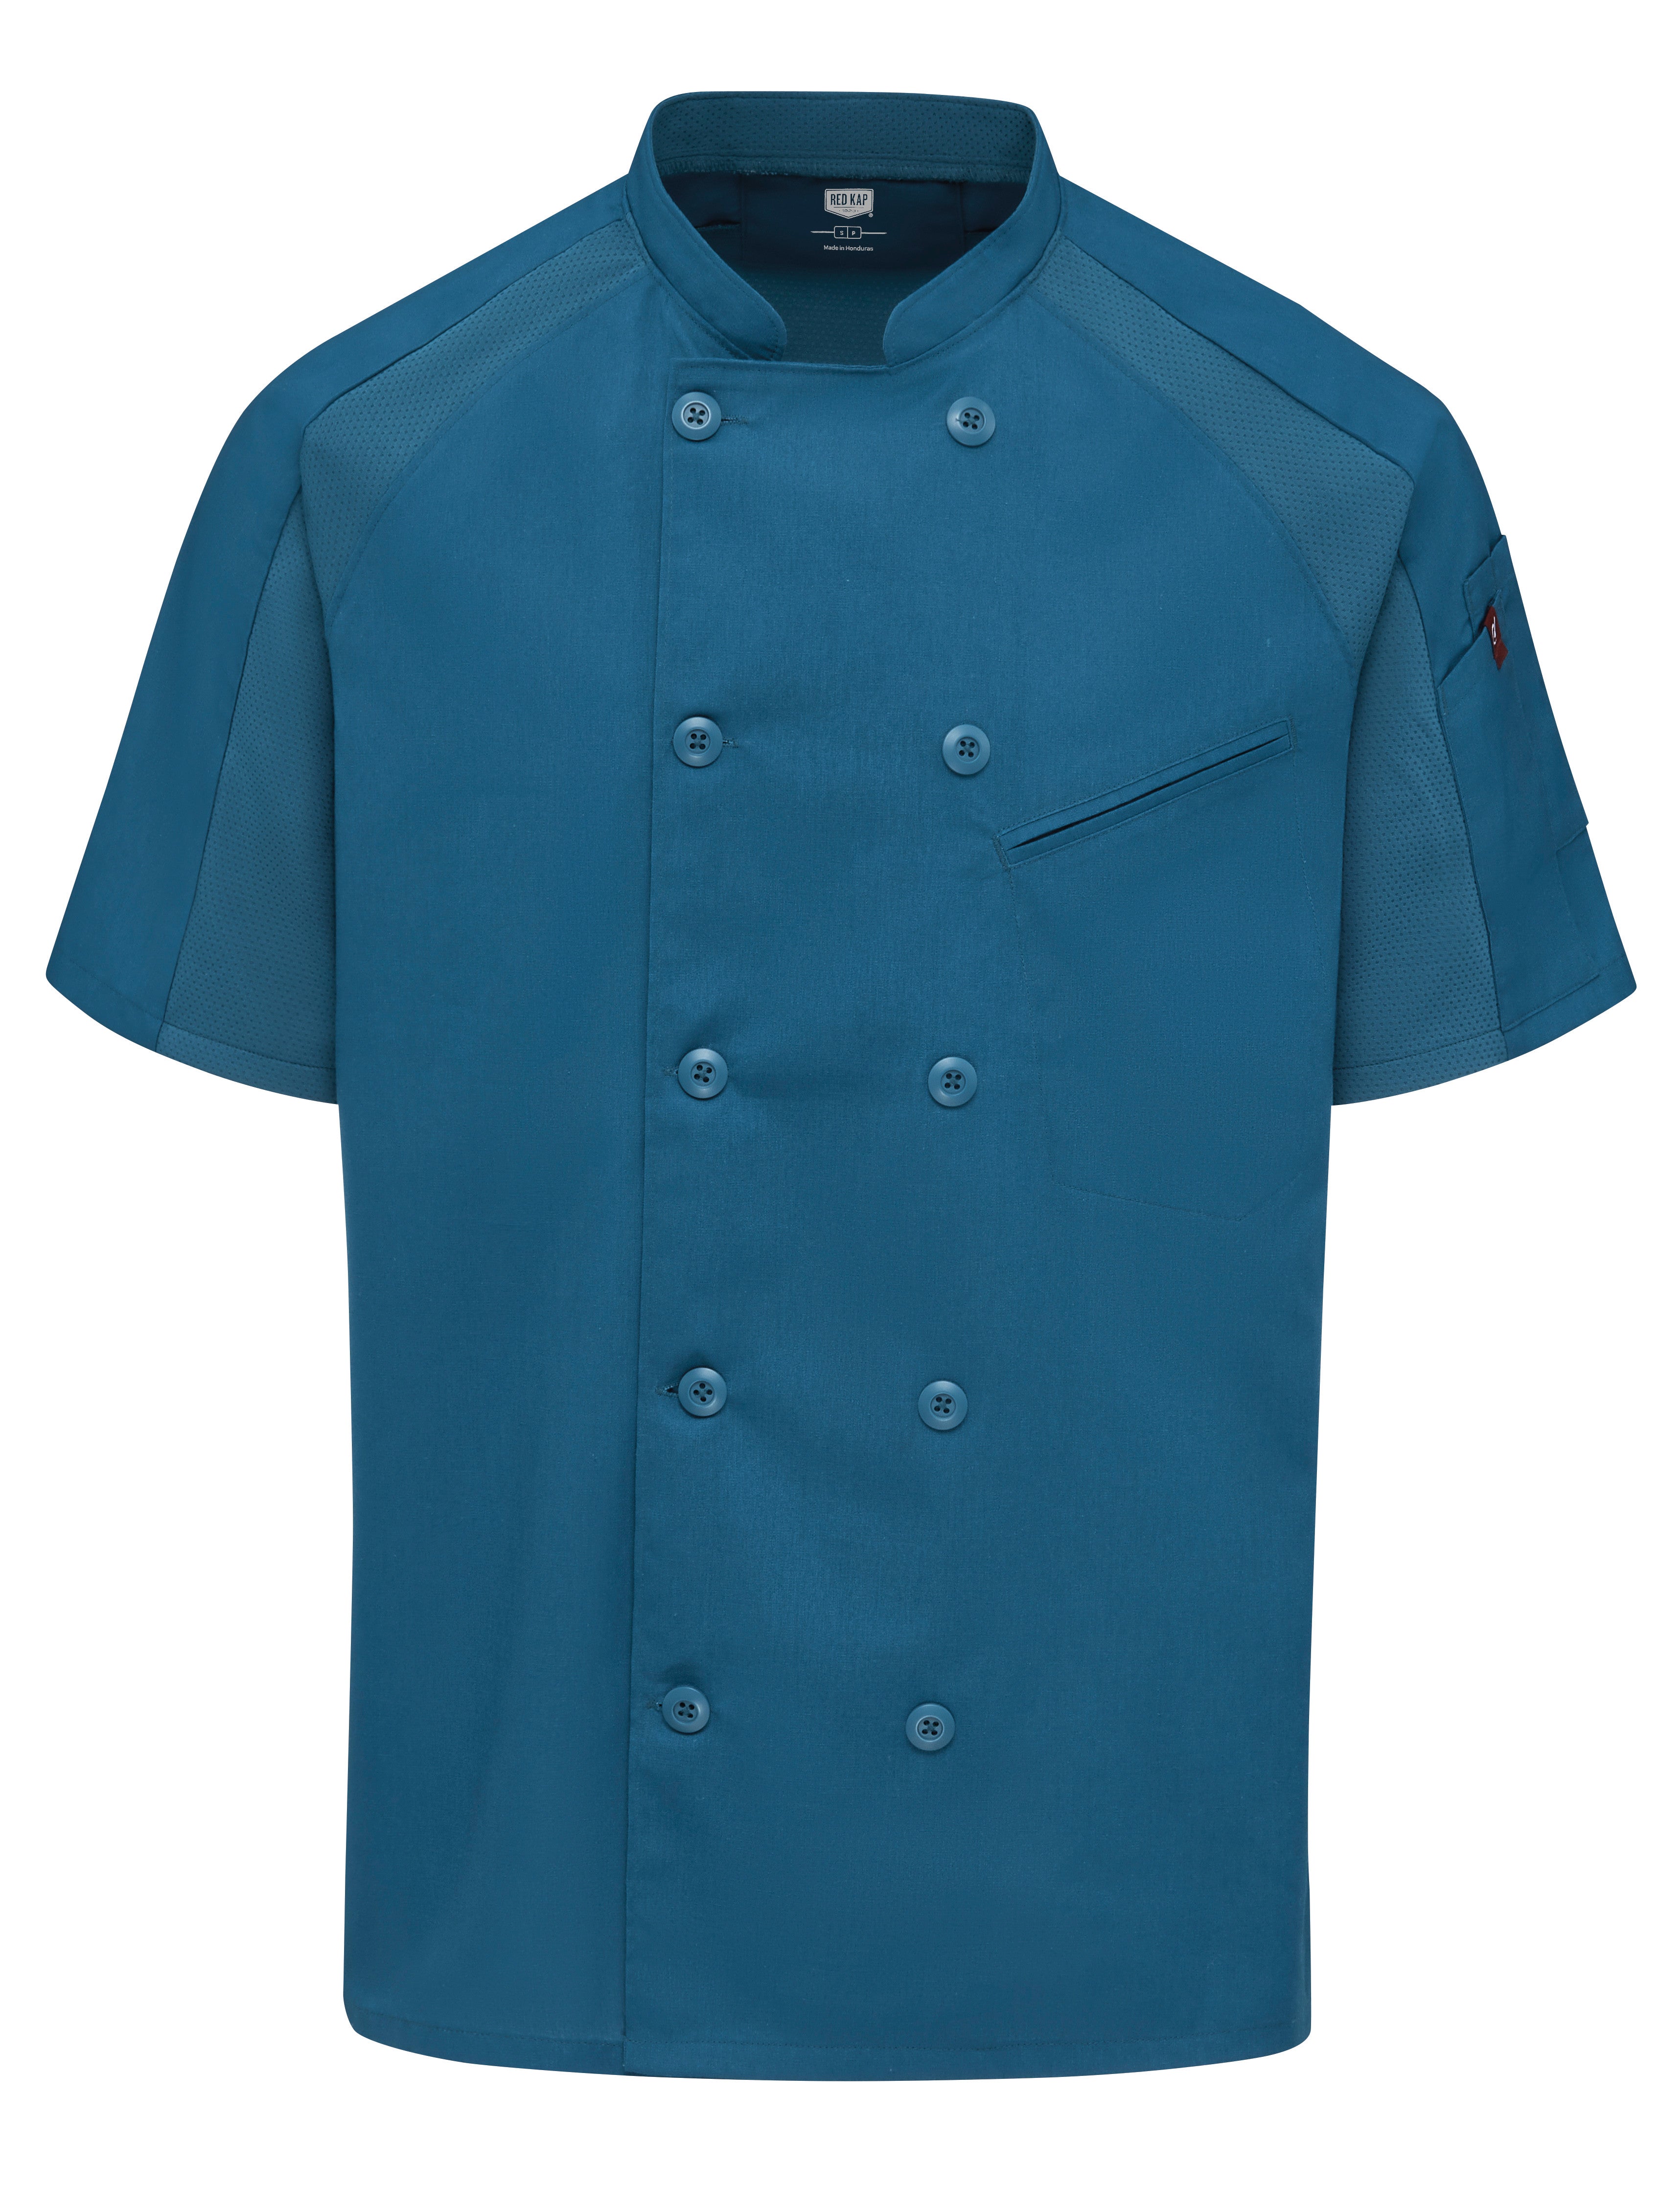 Men's Airflow Raglan Chef Coat with OilBlok 052M - Teal with Teal Mesh-eSafety Supplies, Inc